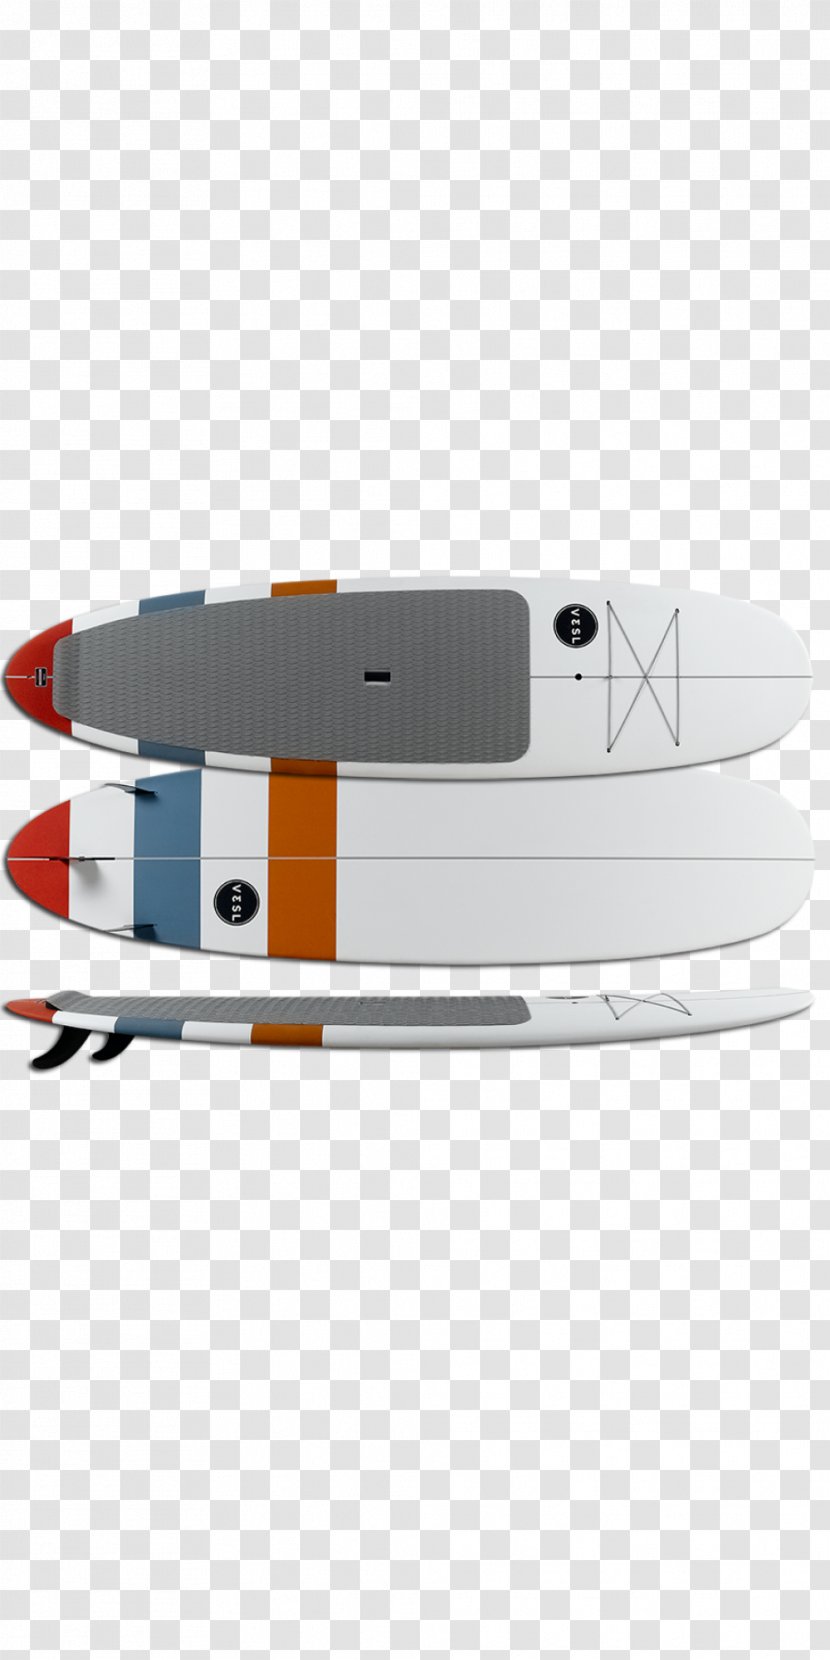 08854 Technology Yacht - Vehicle Transparent PNG